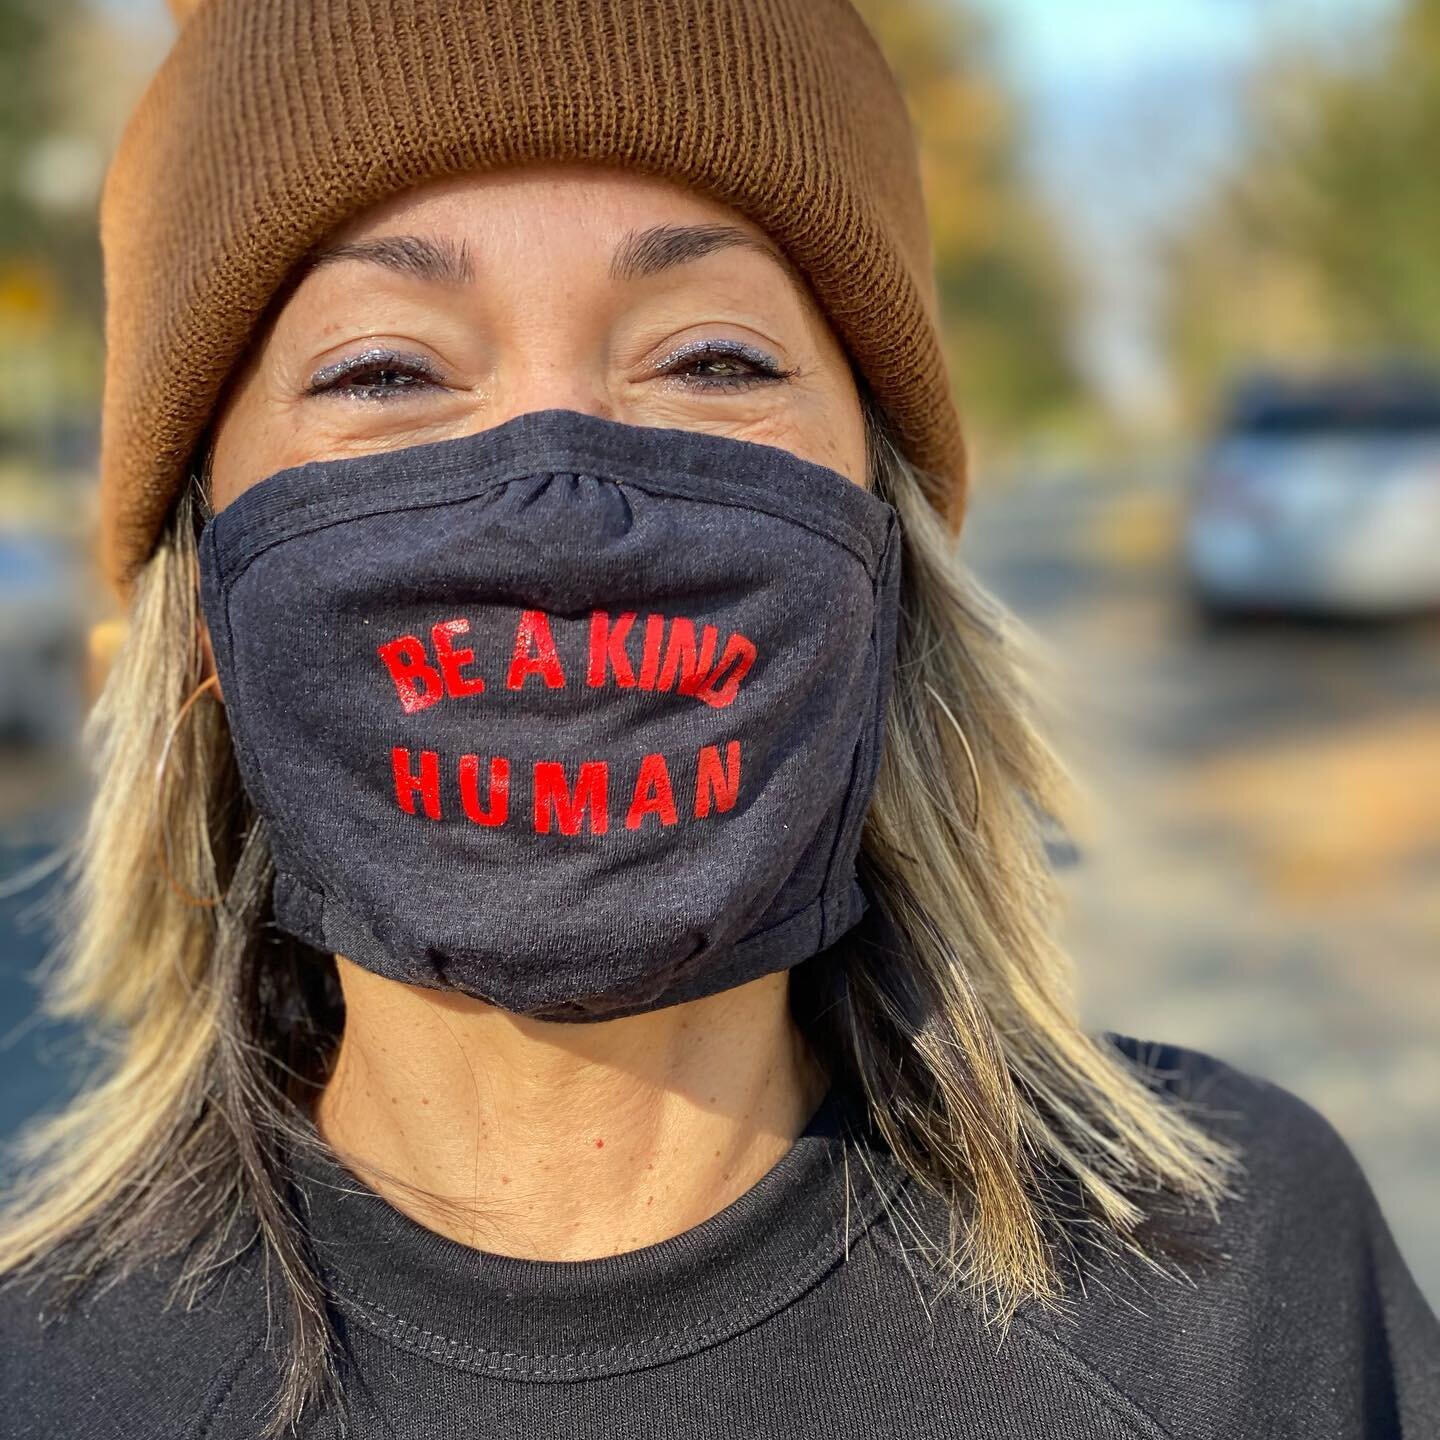 I have no idea why I&rsquo;m laughing but it makes me smile seeing pic! Not to mention NEW MASKS IN STOCK NOW!
#maskup keep you and your family safe ❤️
Join the tribe! www.moniquemaxwell.com
#covid_19 #covidfashion #covidmask #masks #masksarecool #we